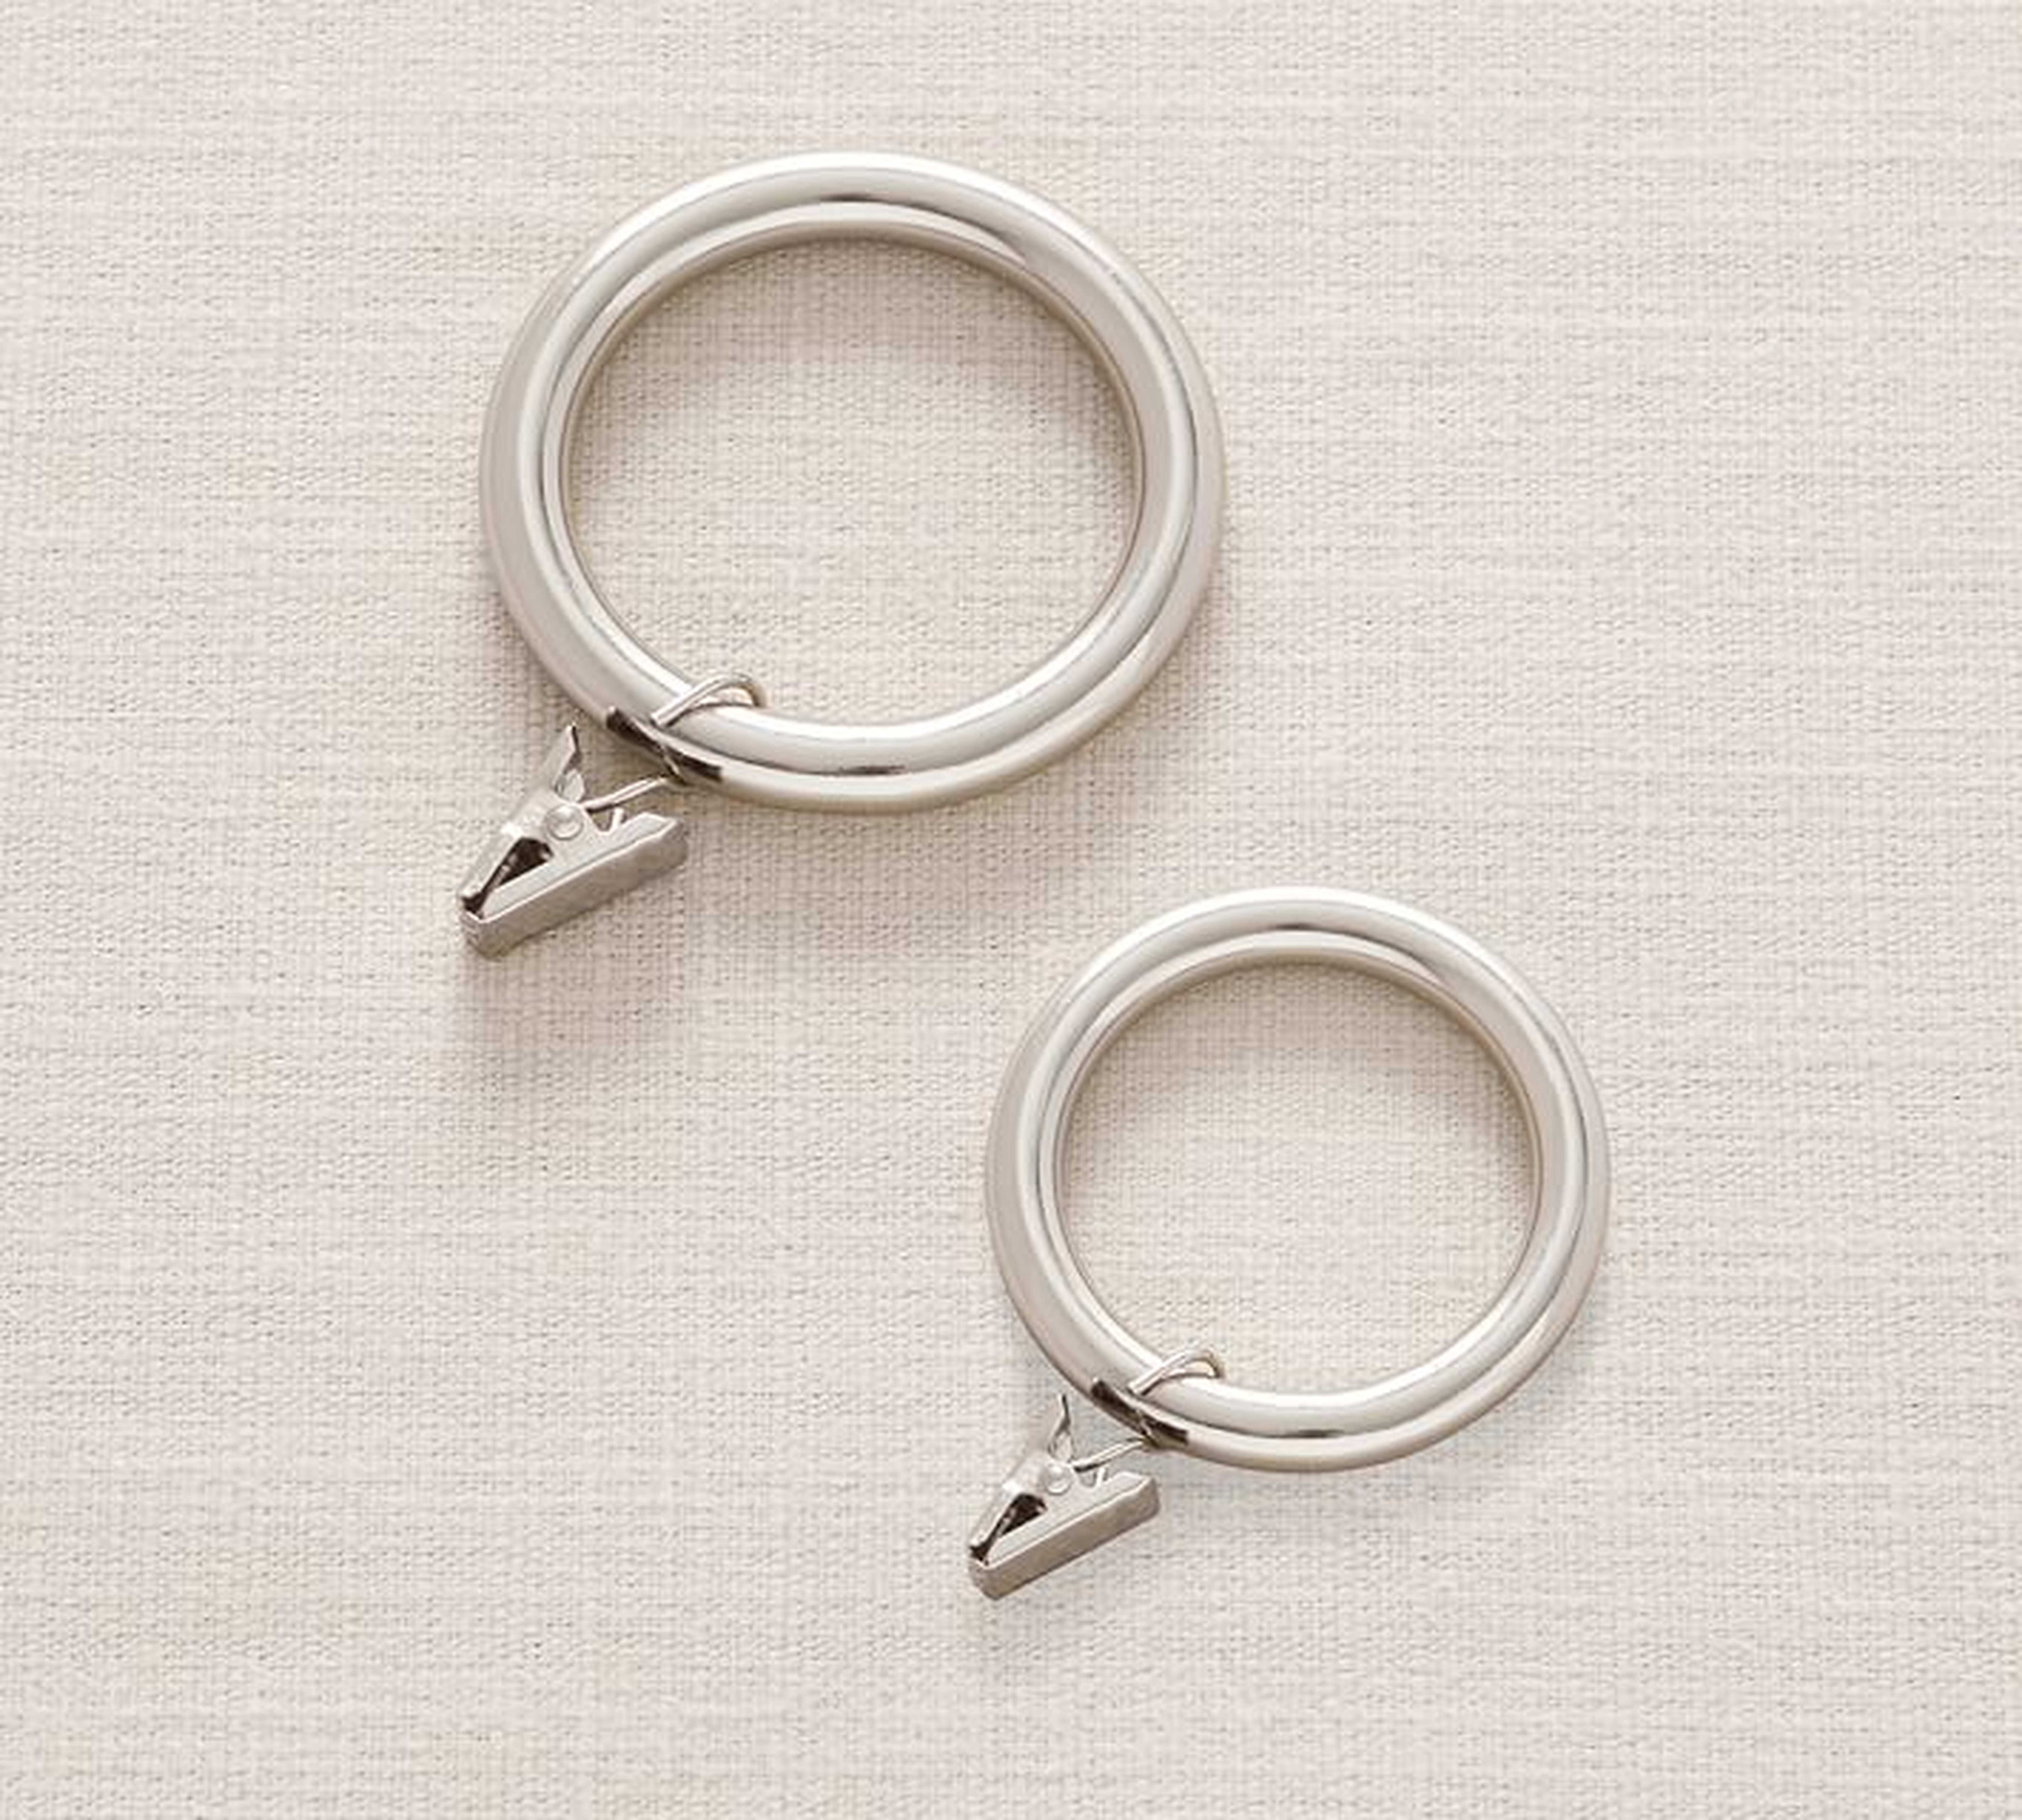 PB Standard Clip Rings, Set of10, Large, Polished Nickel Finish - Pottery Barn